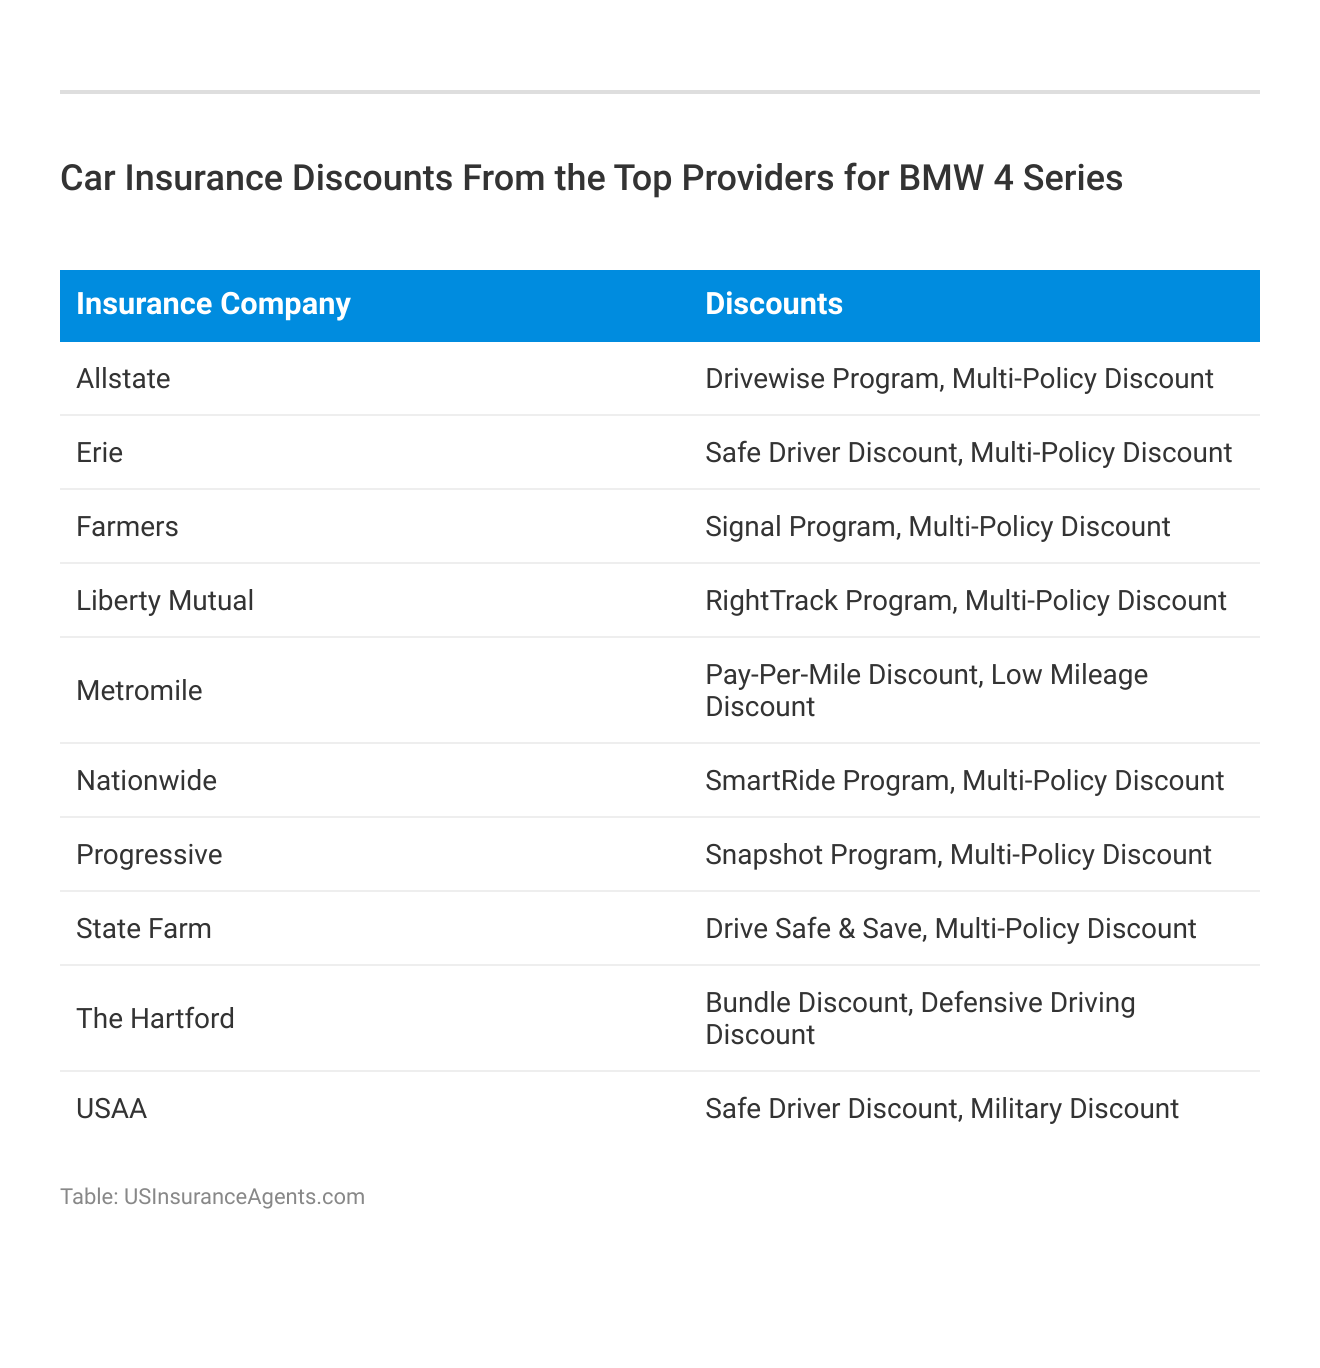 <h3>Car Insurance Discounts From the Top Providers for BMW 4 Series</h3>